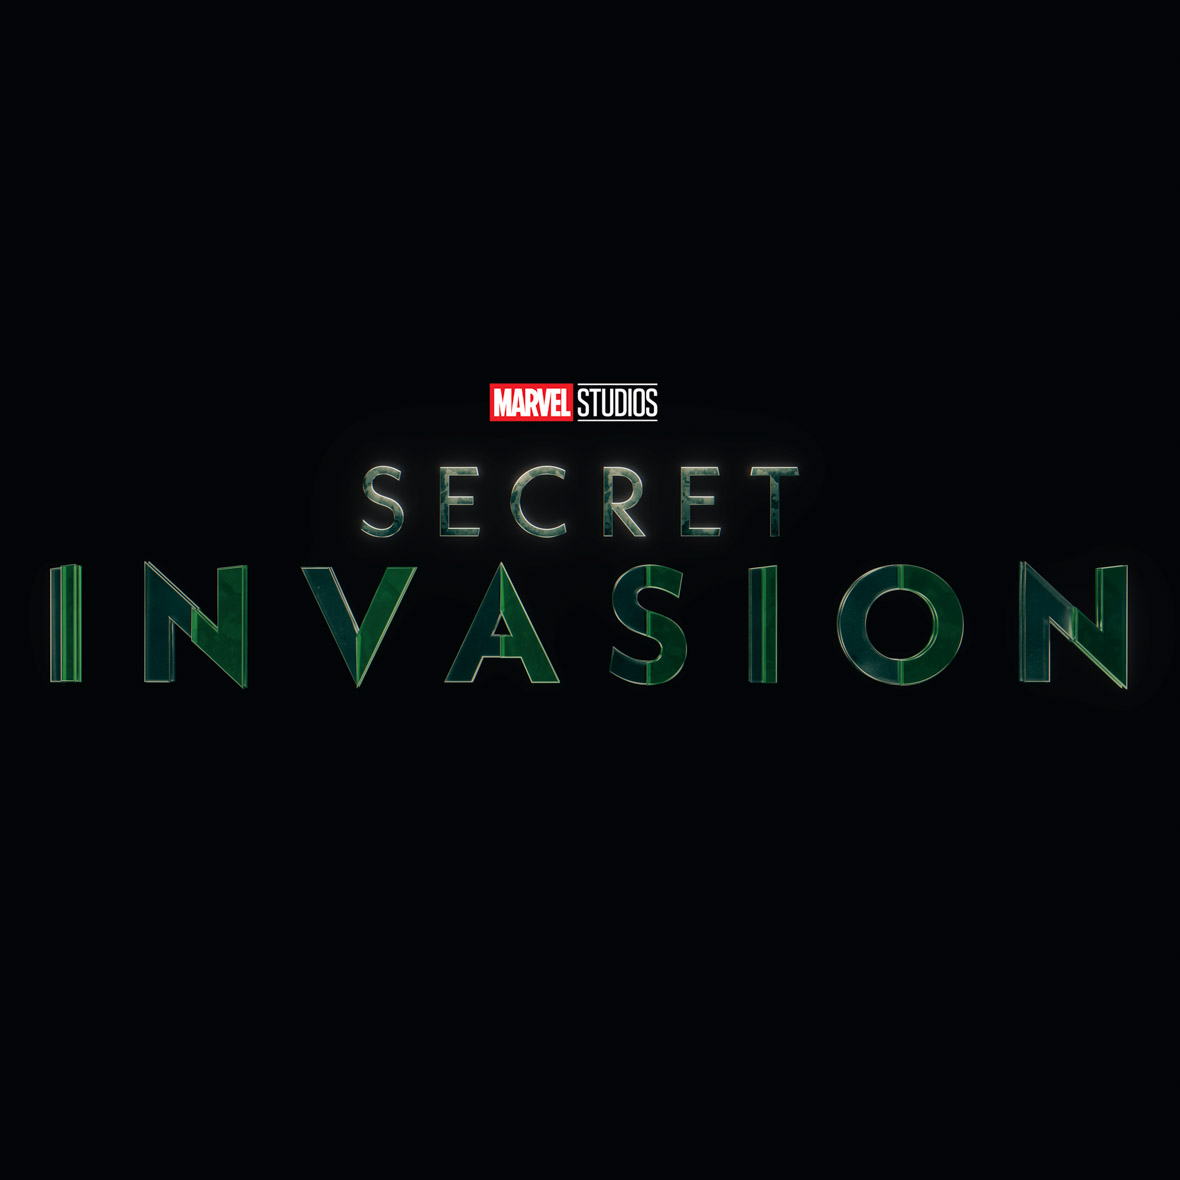 Logo image for Secret Invasion. The words “Secret Invasion” are written in green, geometric font below the classic “Marvel Studios” logo against a black background.